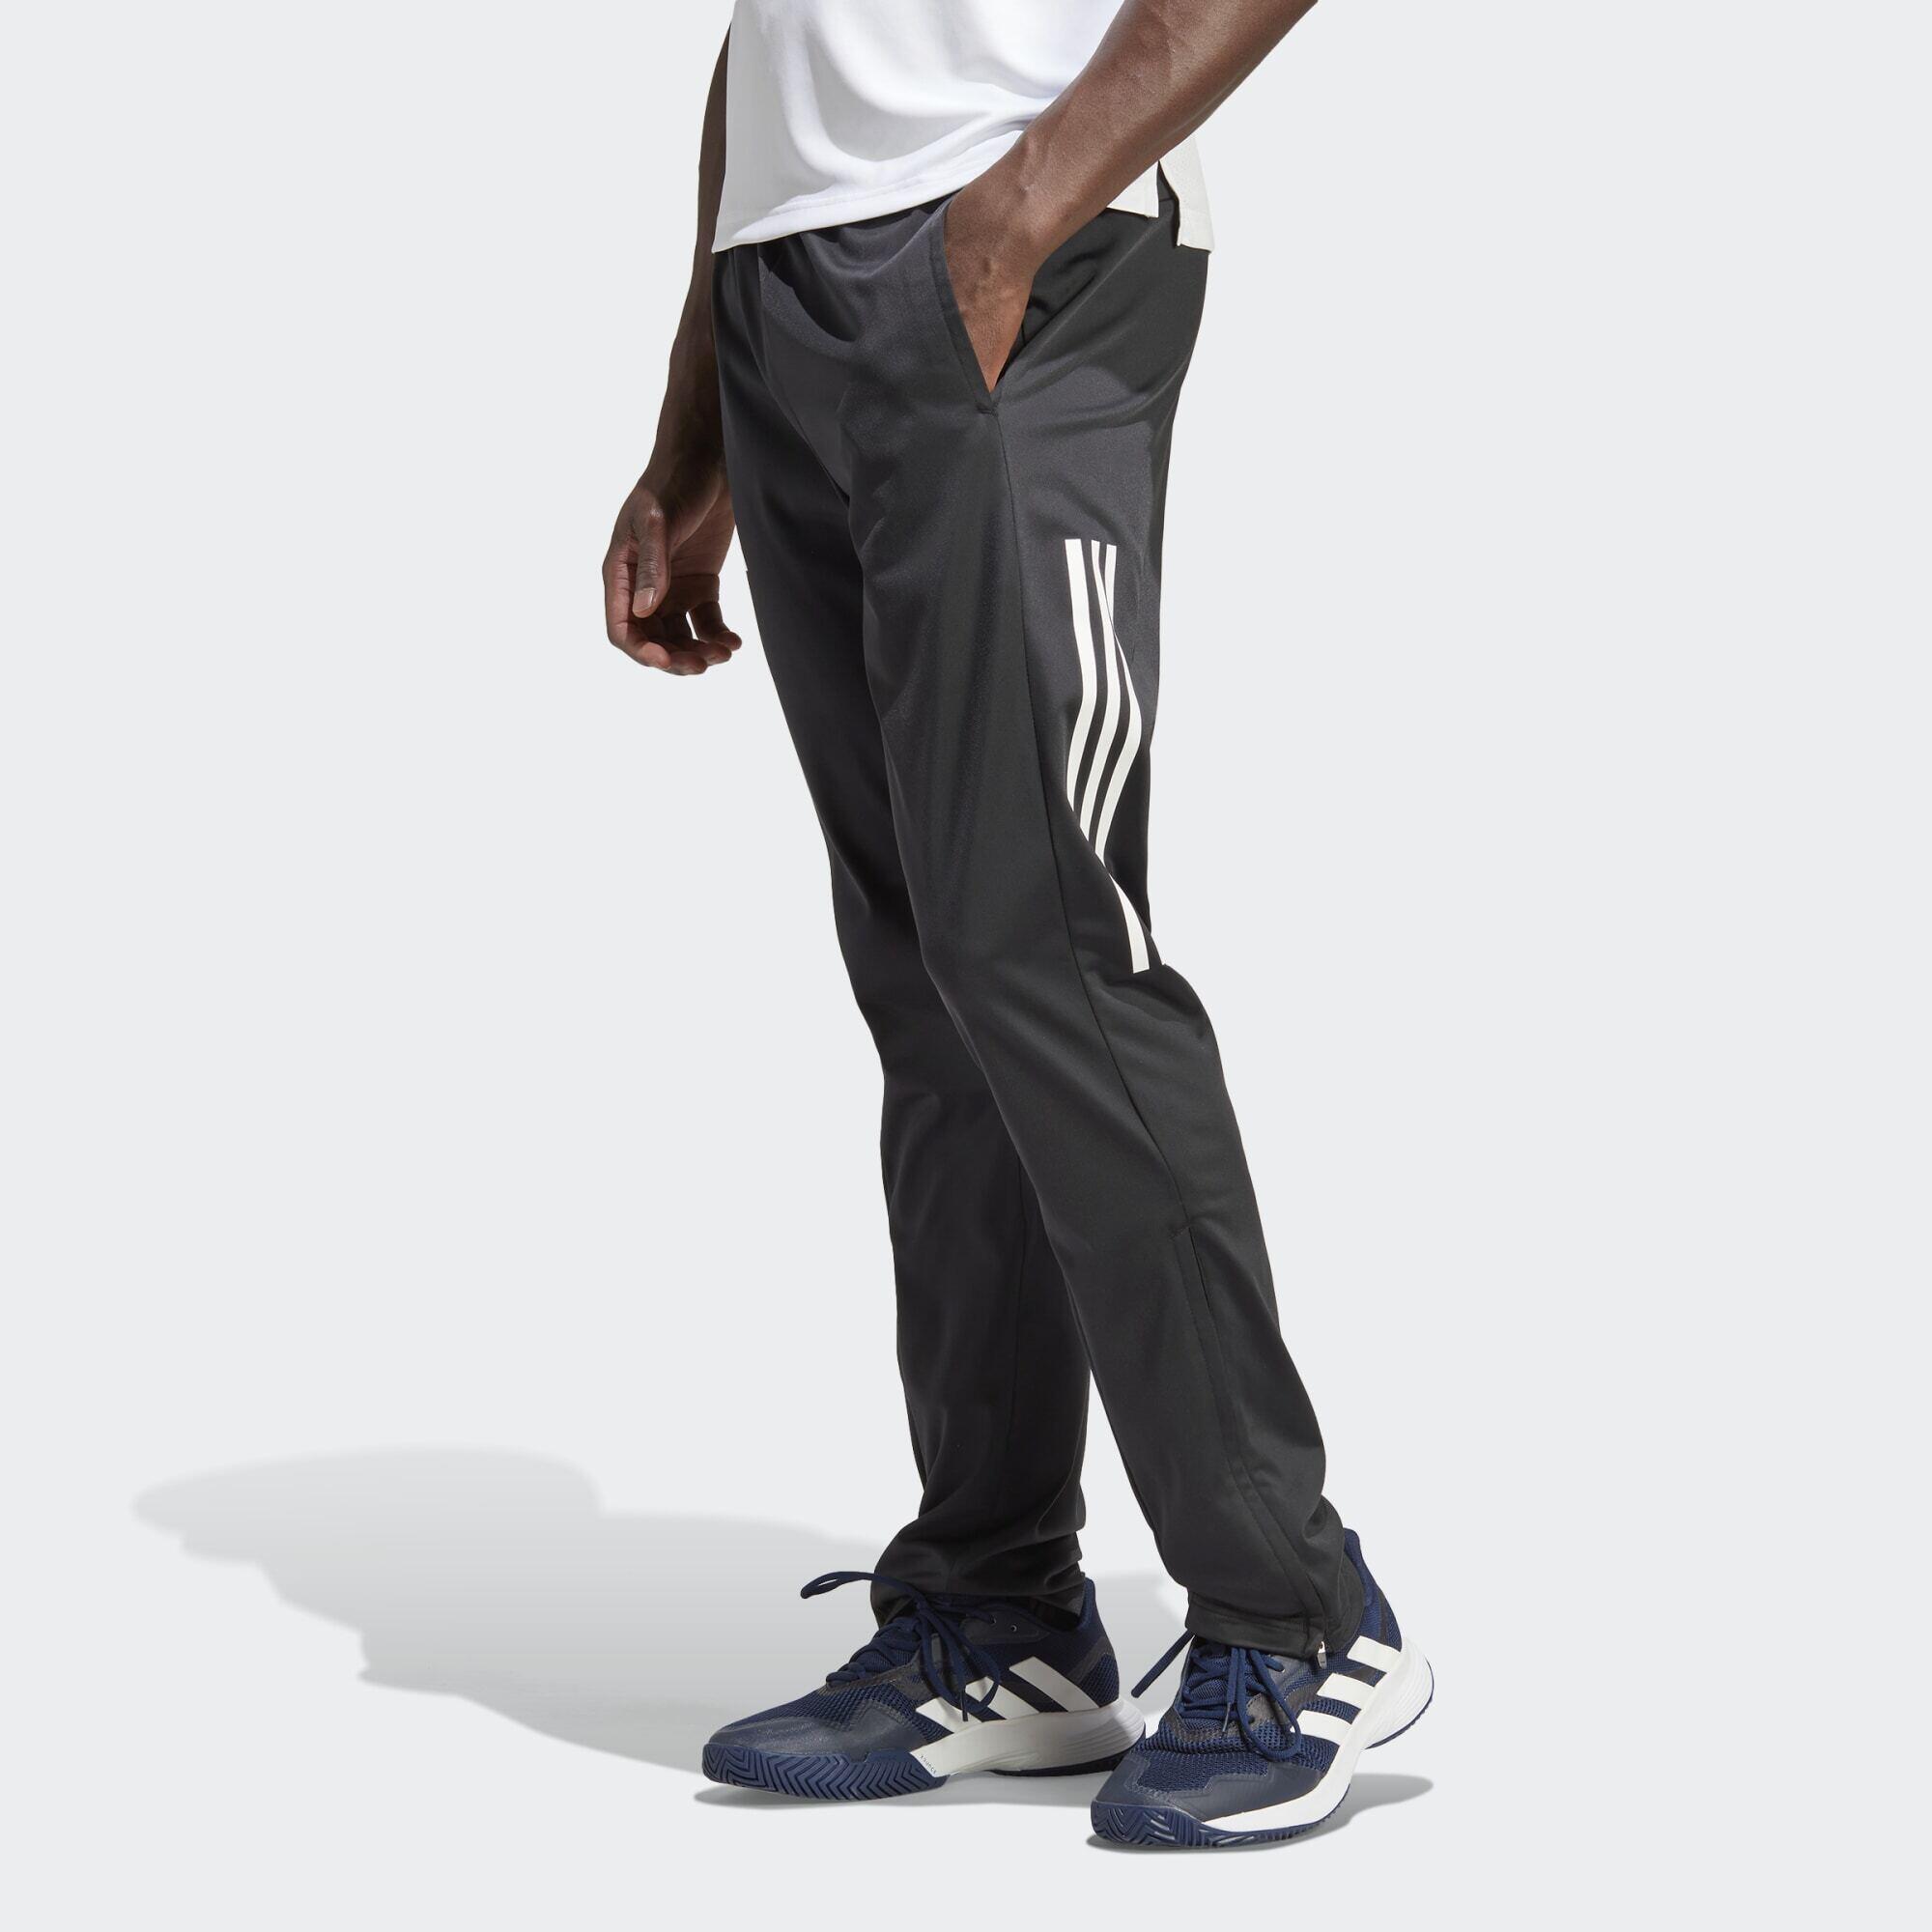 ADIDAS 3-Stripes Knitted Tennis Pants